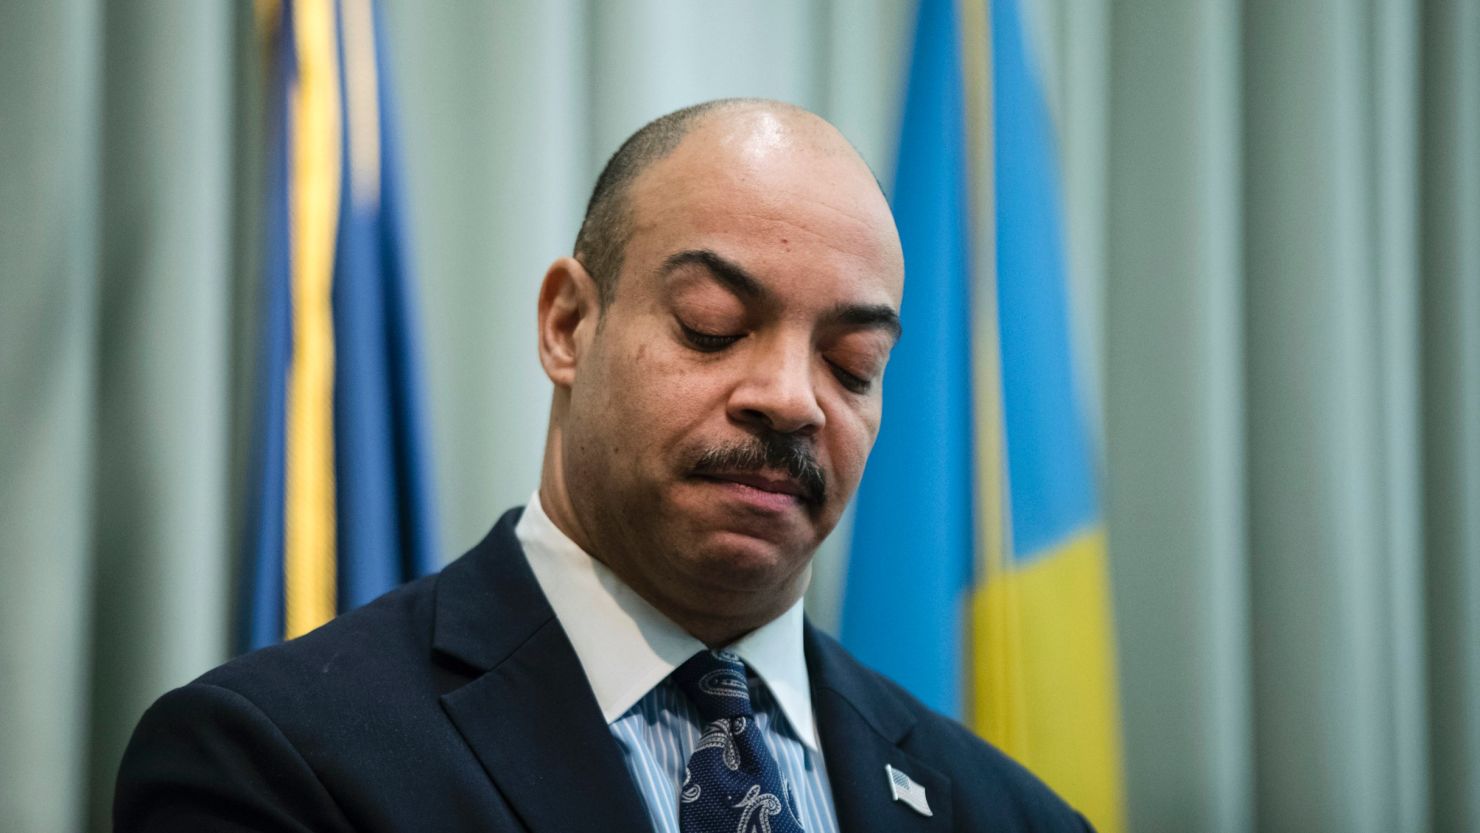 Philadelphia District Attorney Seth Williams is accused of accepting bribes between 2010 and 2015.